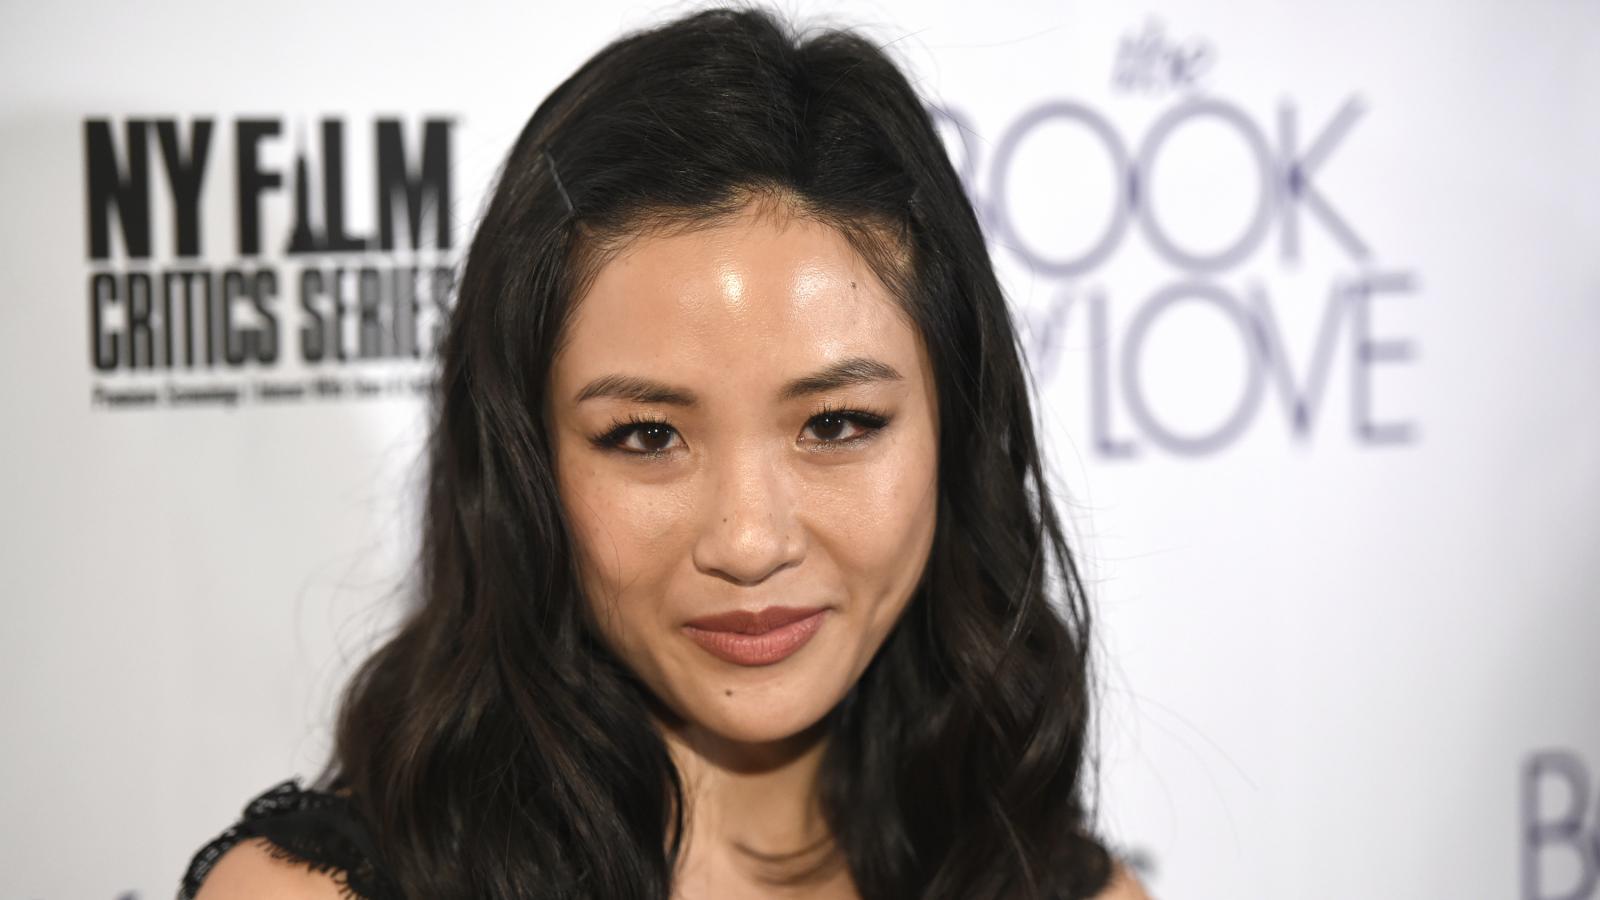 Crazy Rich Asians movie: Is Constance Wu's character a good